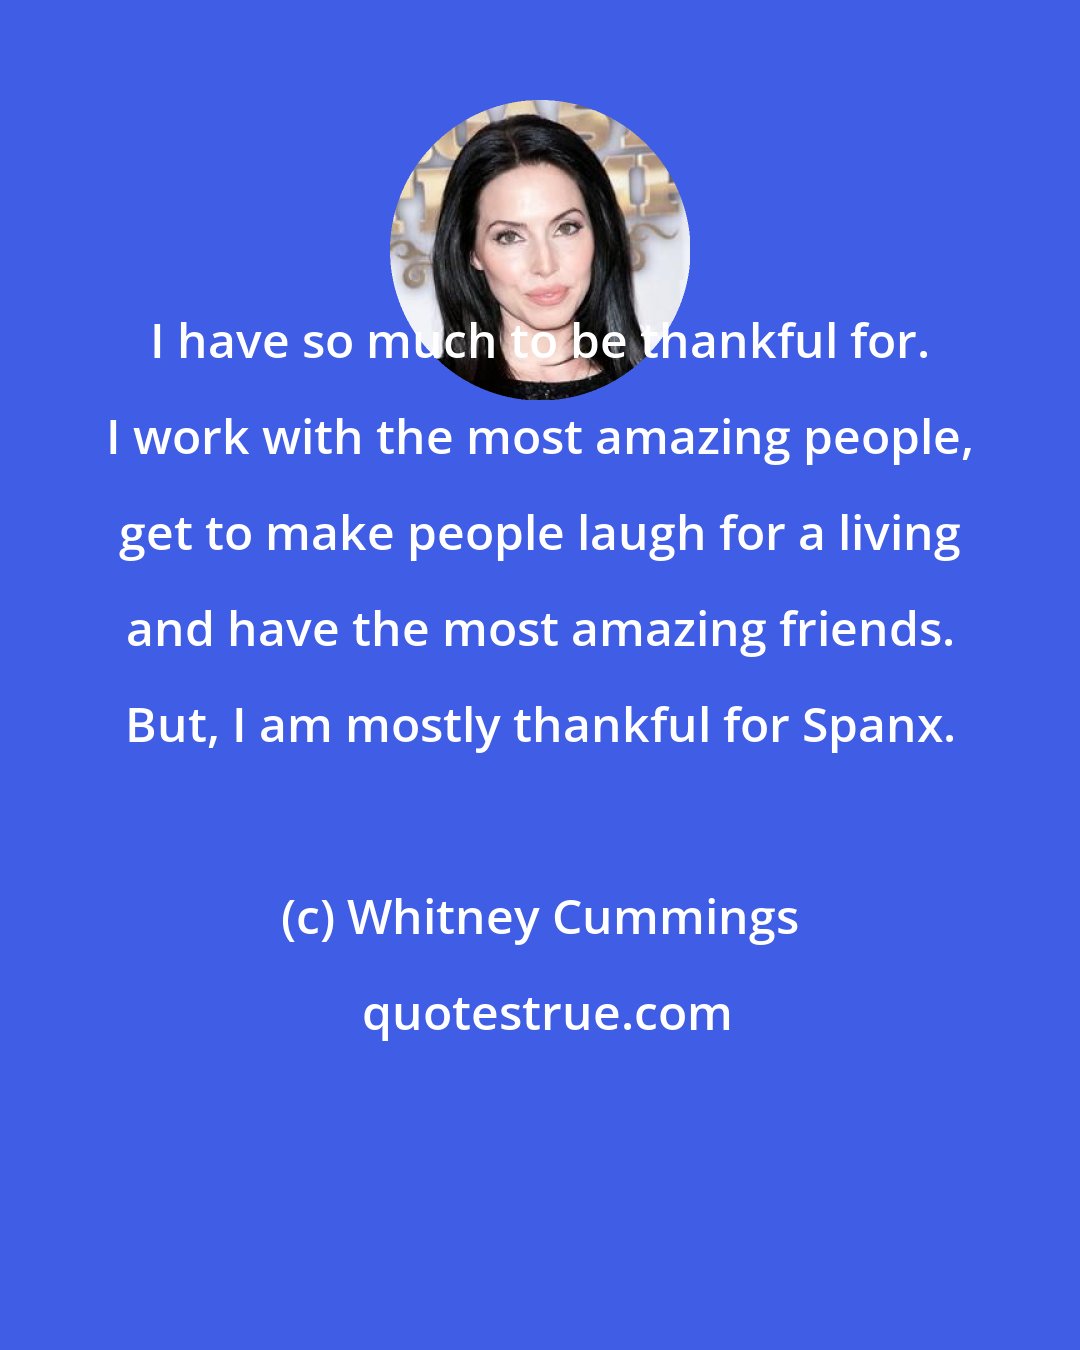 Whitney Cummings: I have so much to be thankful for. I work with the most amazing people, get to make people laugh for a living and have the most amazing friends. But, I am mostly thankful for Spanx.